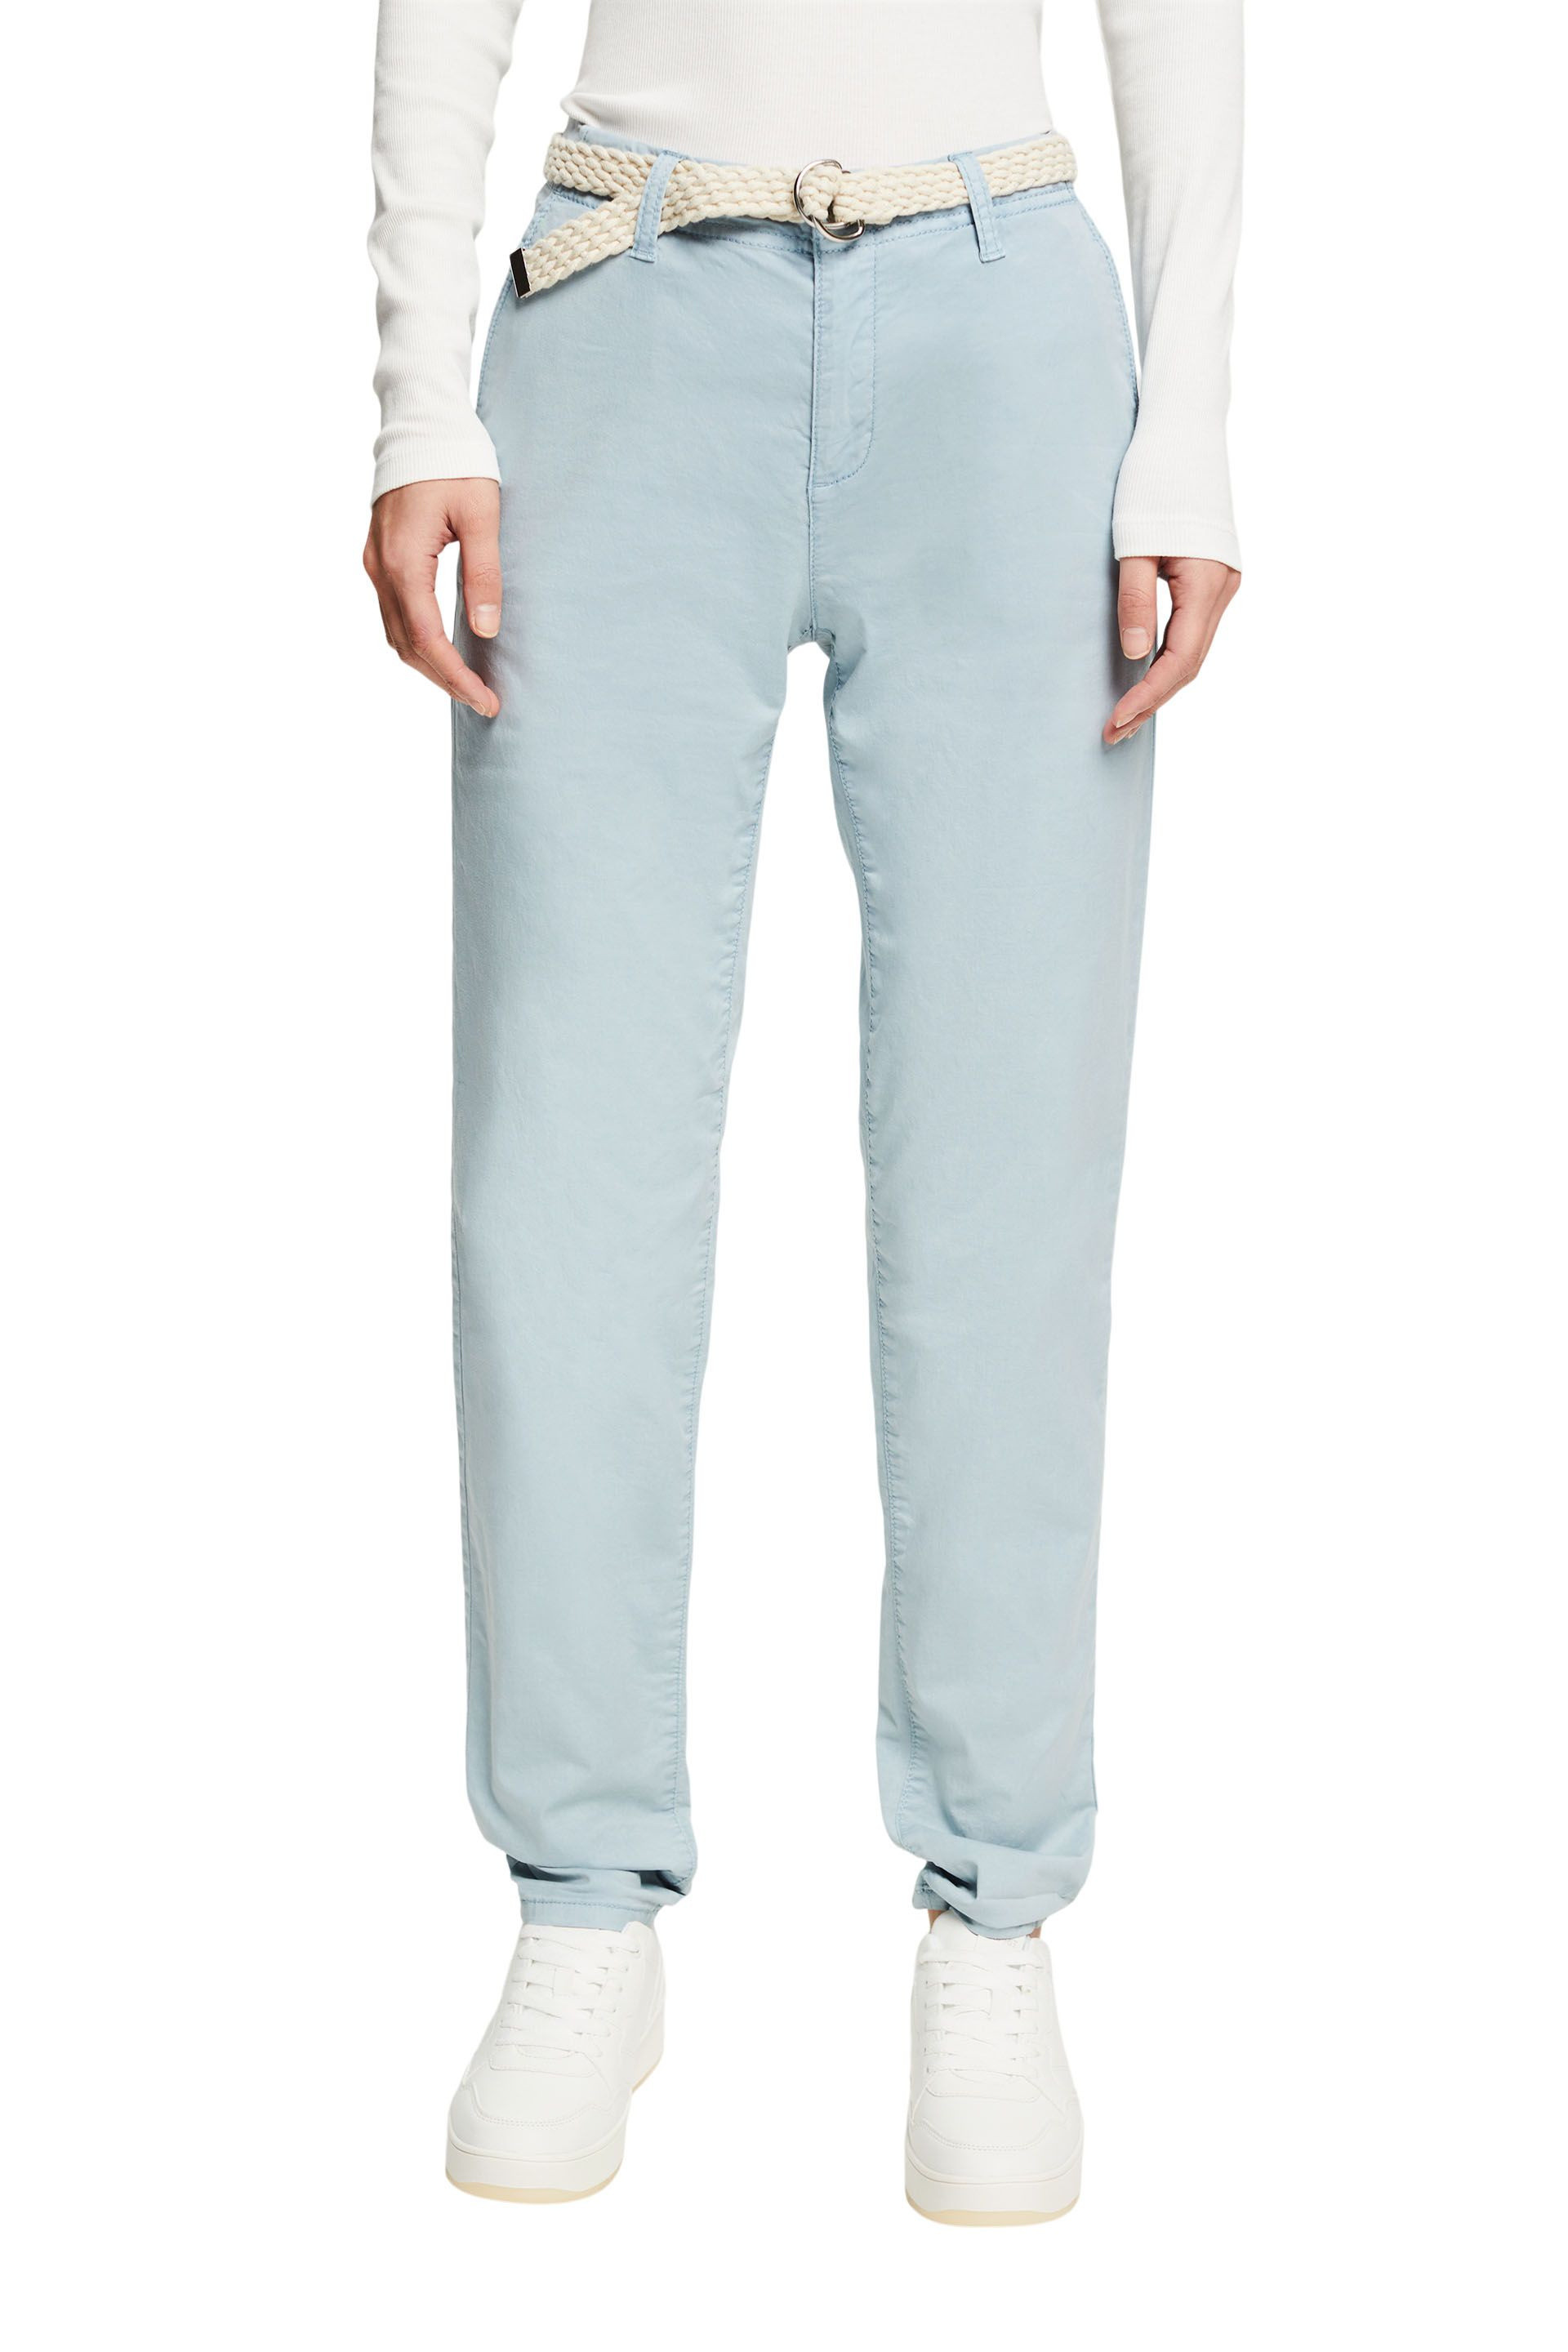 Chino trousers with woven belt, Blue Celeste, large image number 1